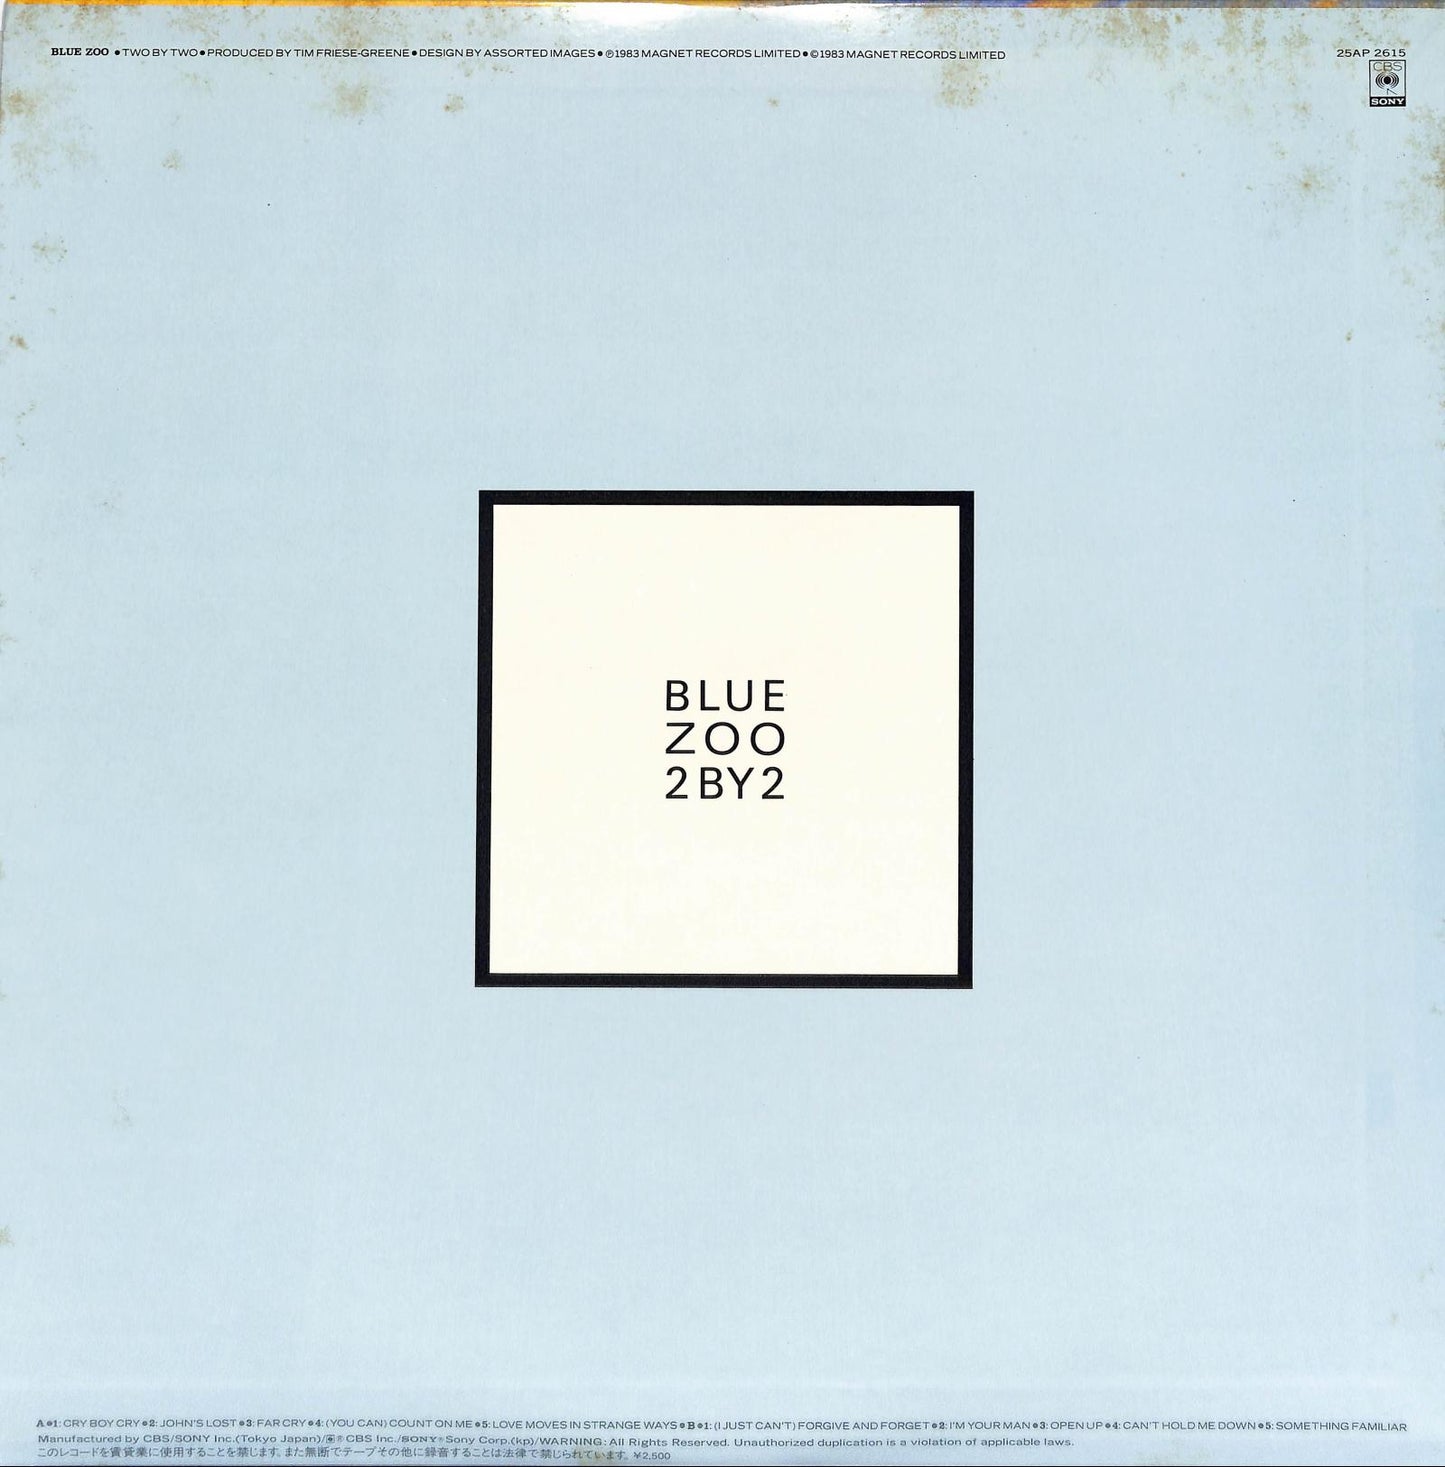 BLUE ZOO - 2 By 2